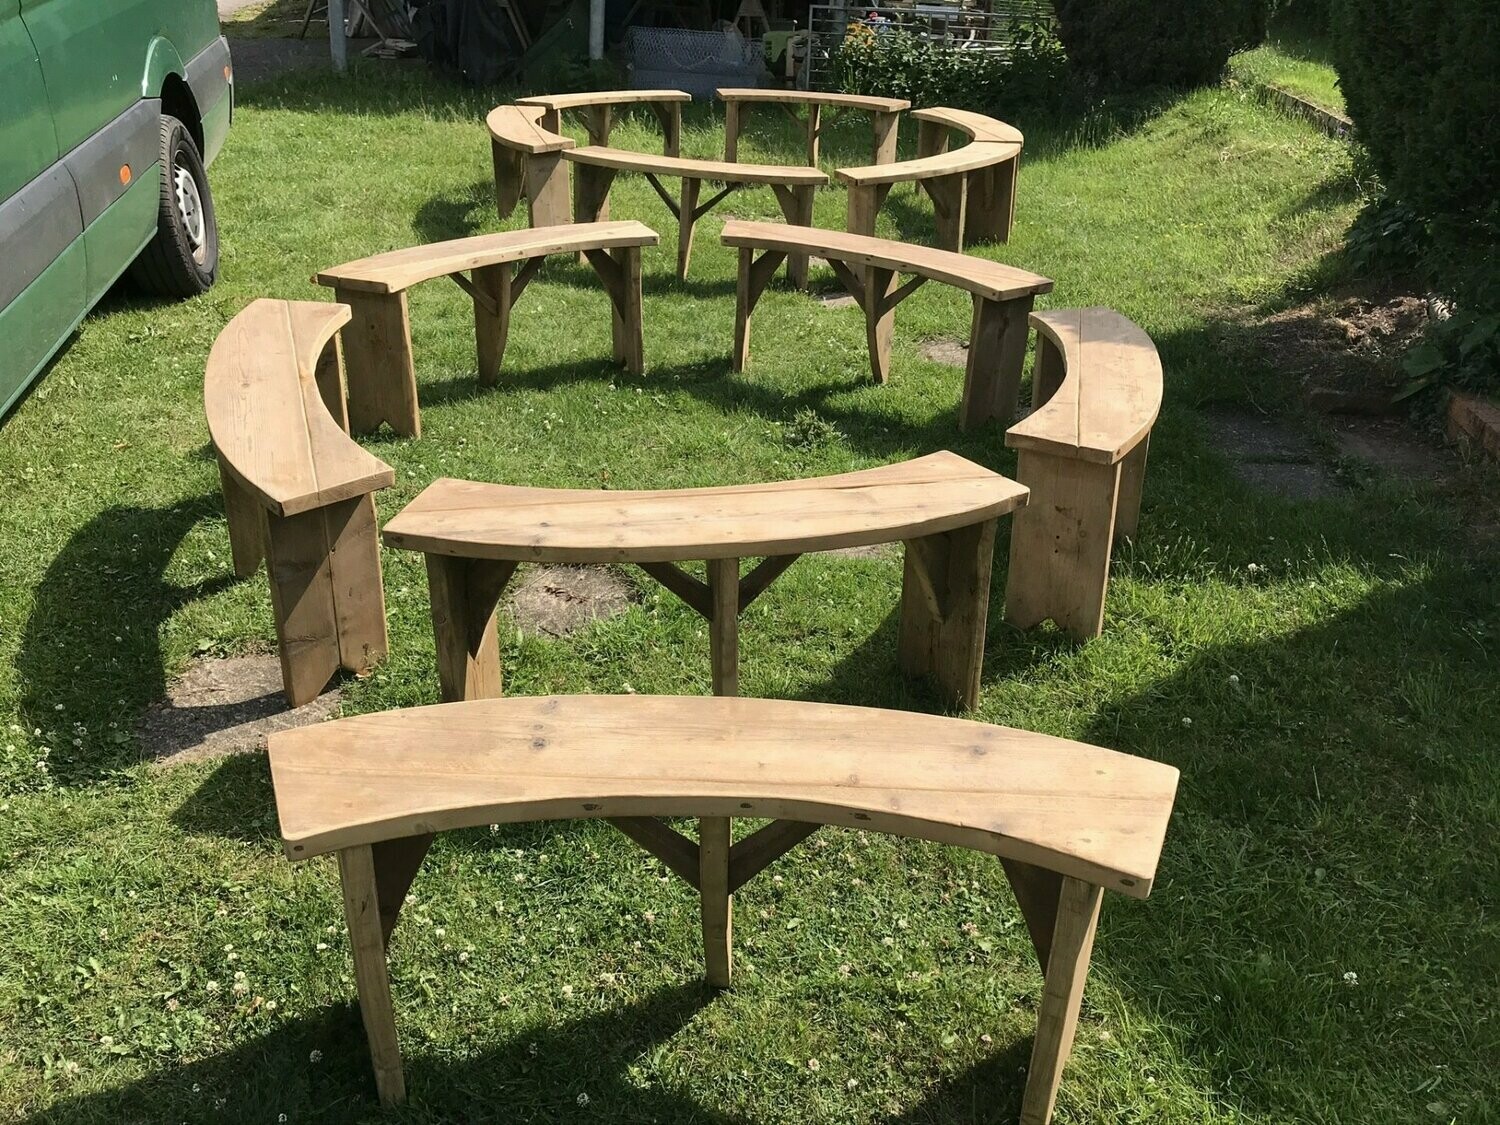 4 x 4ft Curved Bench hand made reclaimed timber Garden Fire Pit Meeting Room School Club Bench. Fire pit bench Curved garden bench Garden Seating. Environmentally friendly.